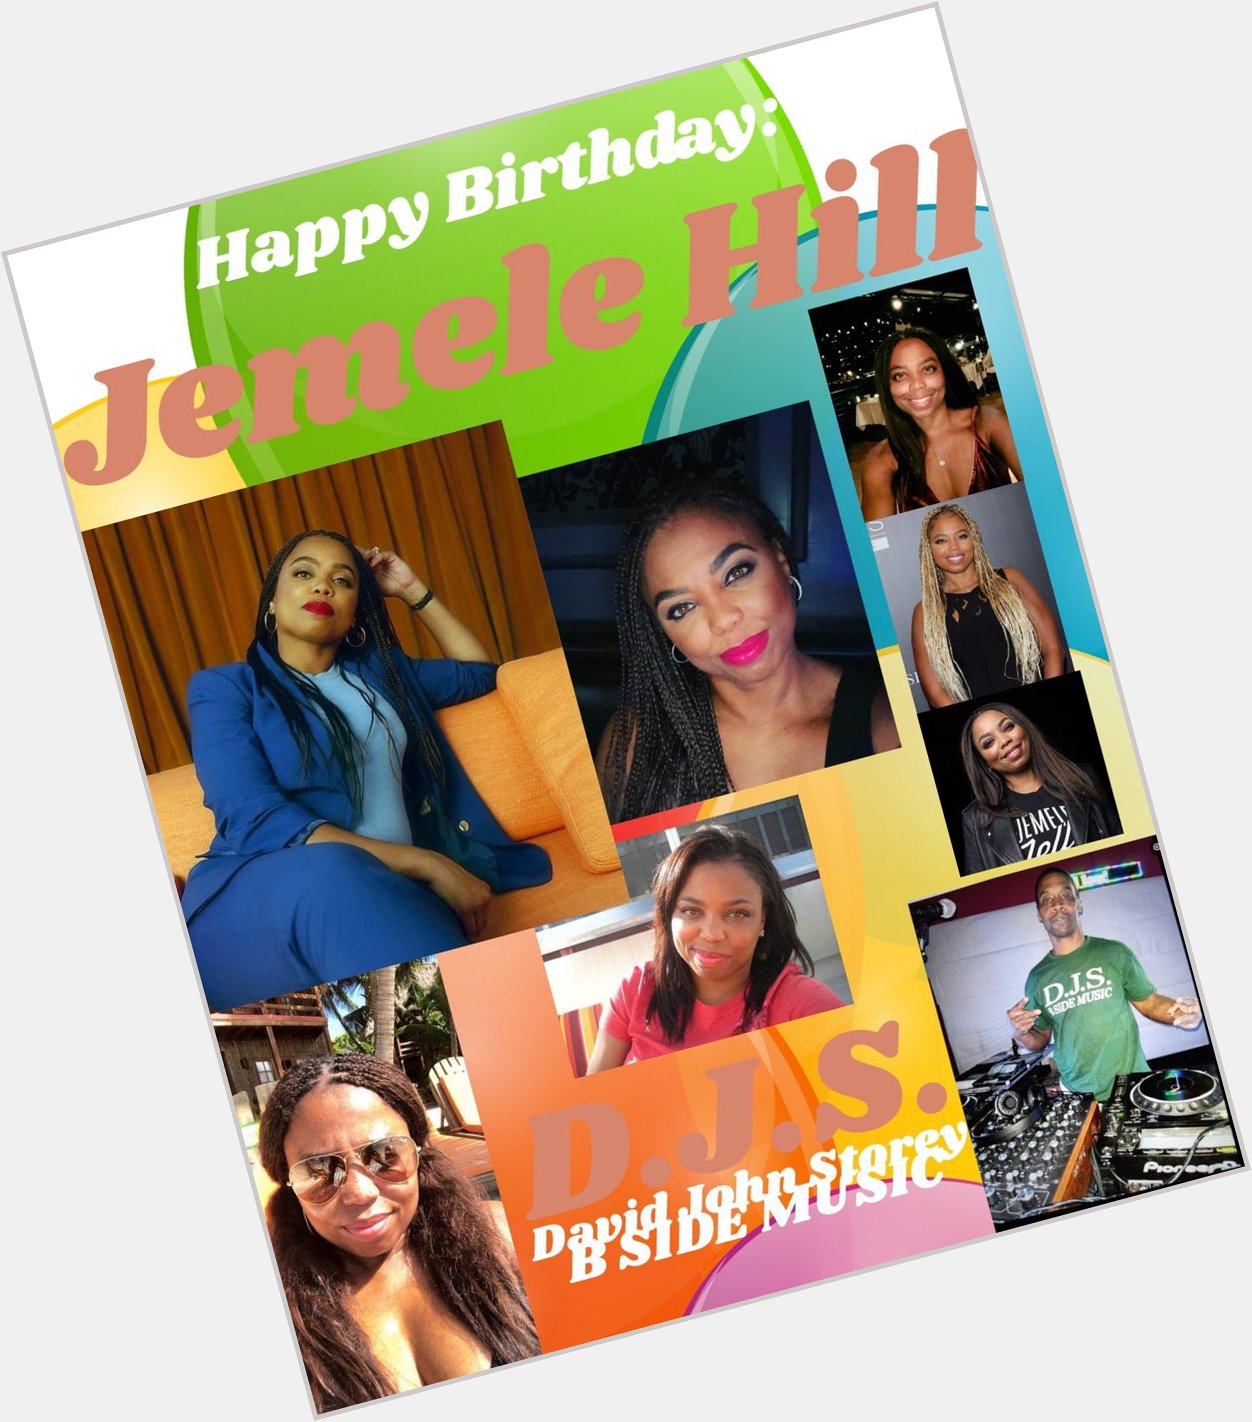 I(D.J.S.) taking time to say Happy Birthday to Journalist: \"JEMELE HILL\"!! 